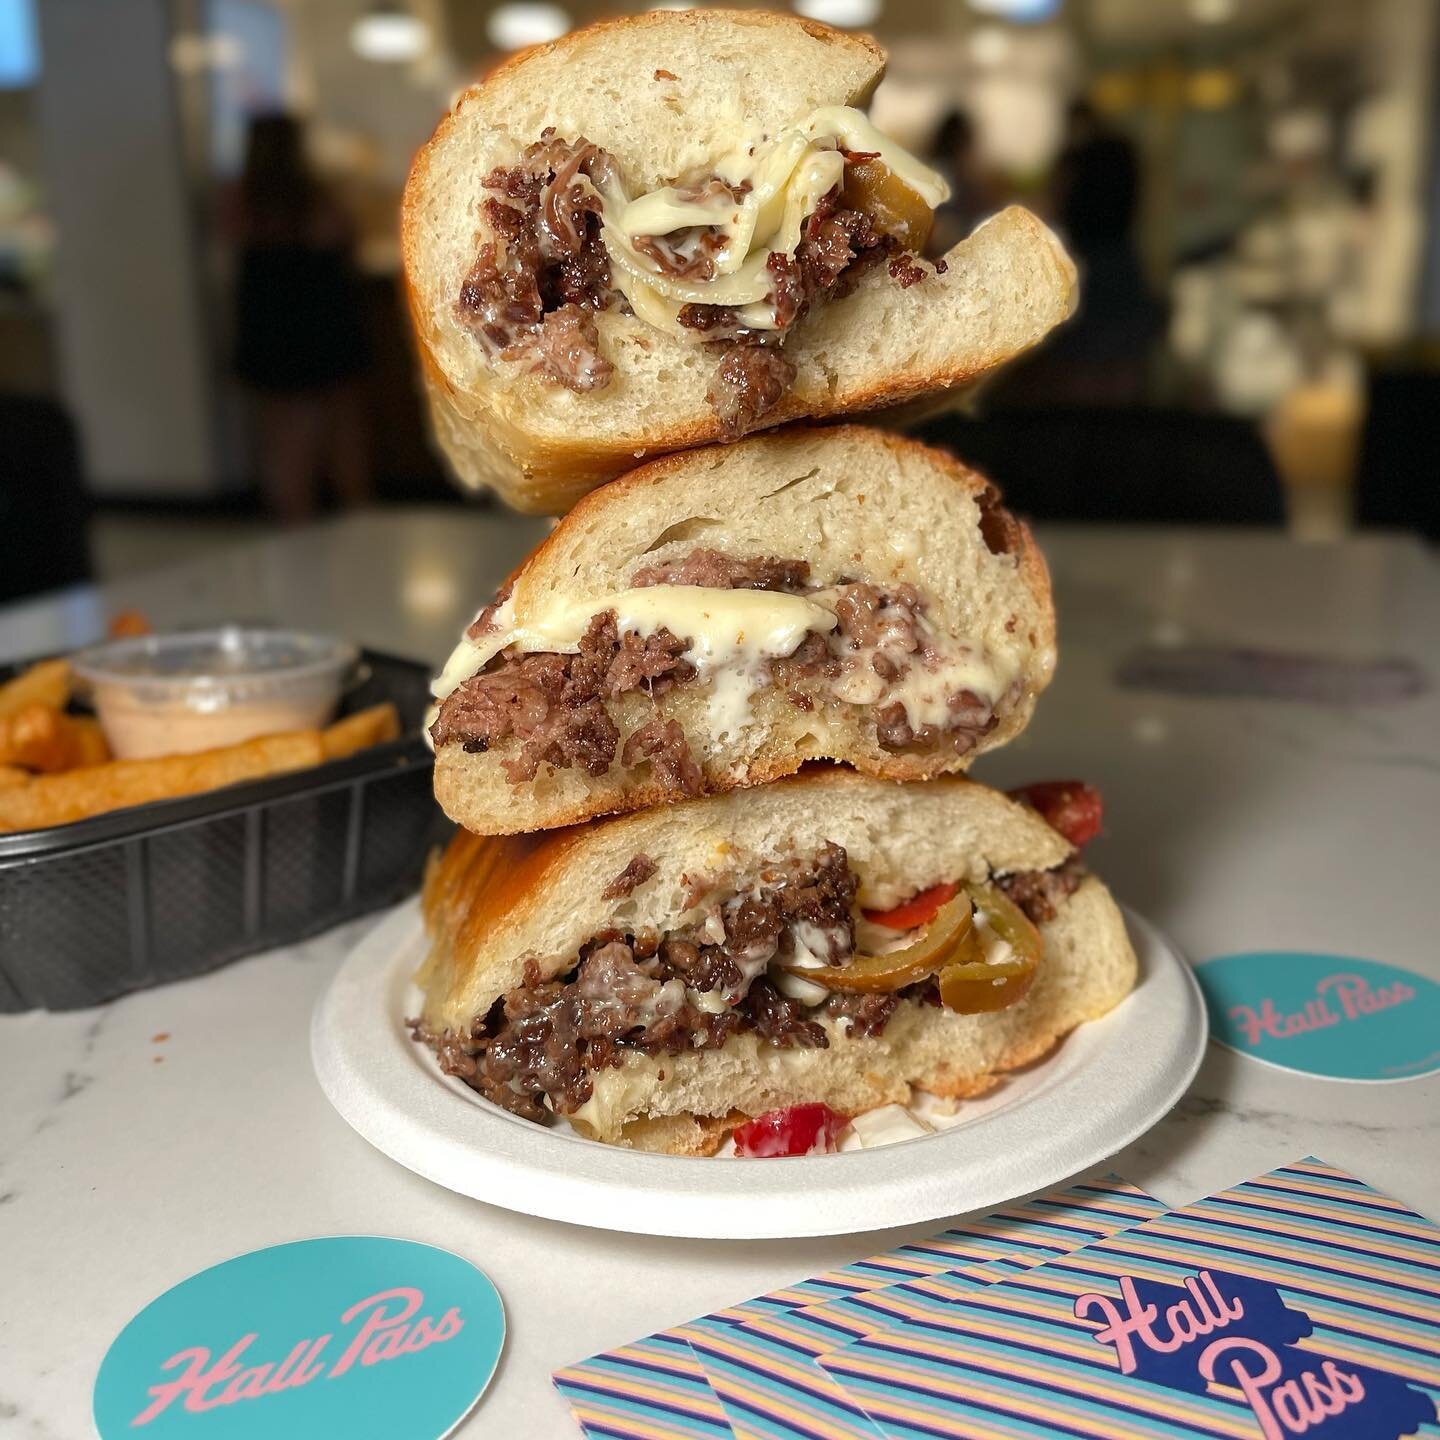 Locked &amp; loaded with more meat, more cheese, &amp; more press 🧀🥩🗞

Thank you to @eaterboston for the love! 💚

📸: @617bites